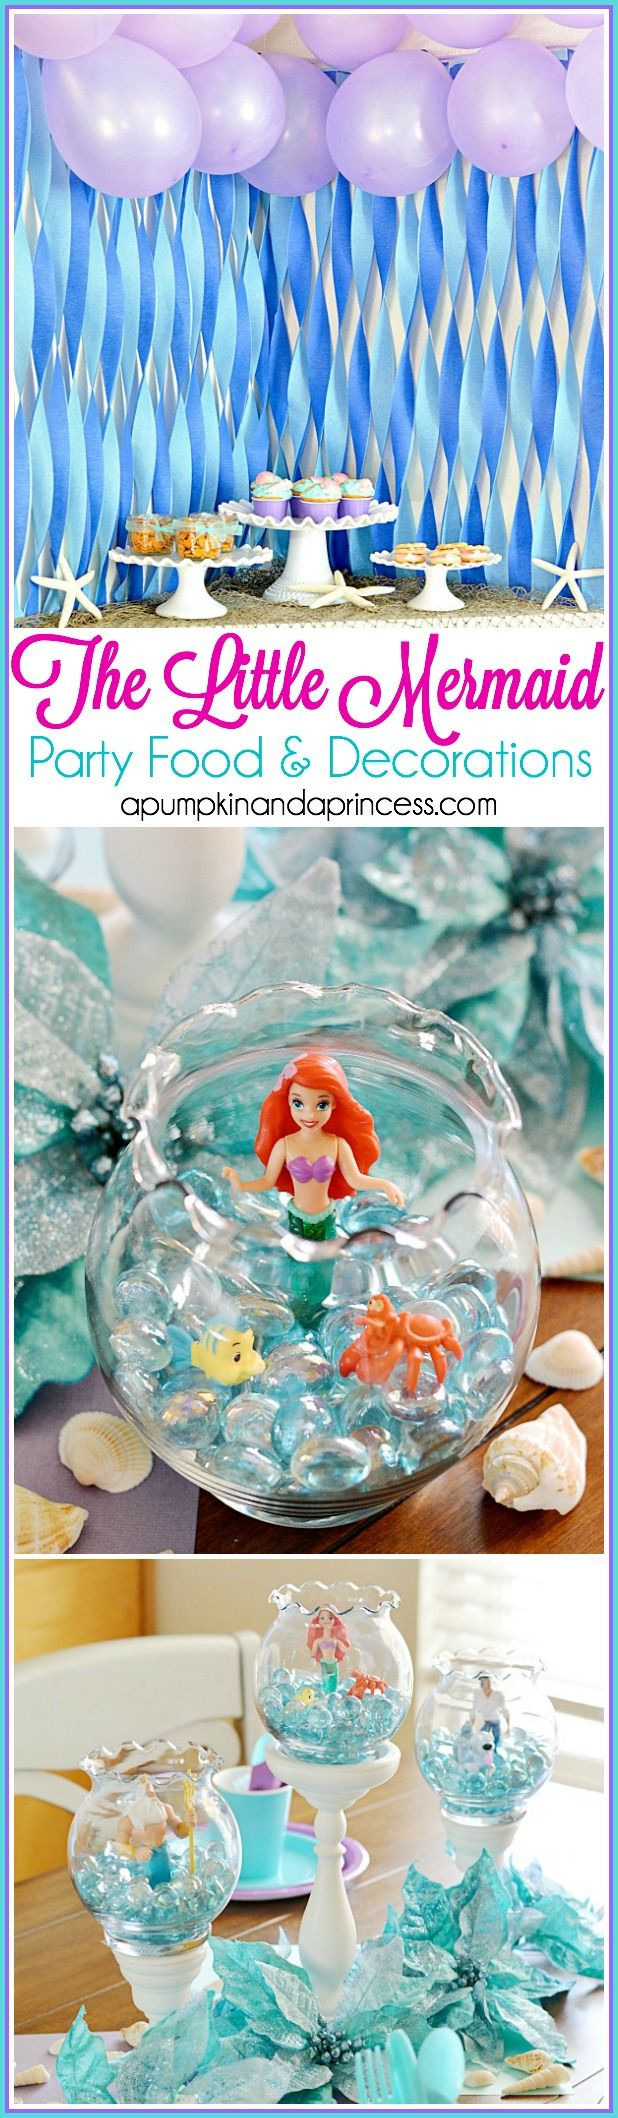 Ideas For Little Mermaid Birthday Party
 The Little Mermaid Party Party Ideas